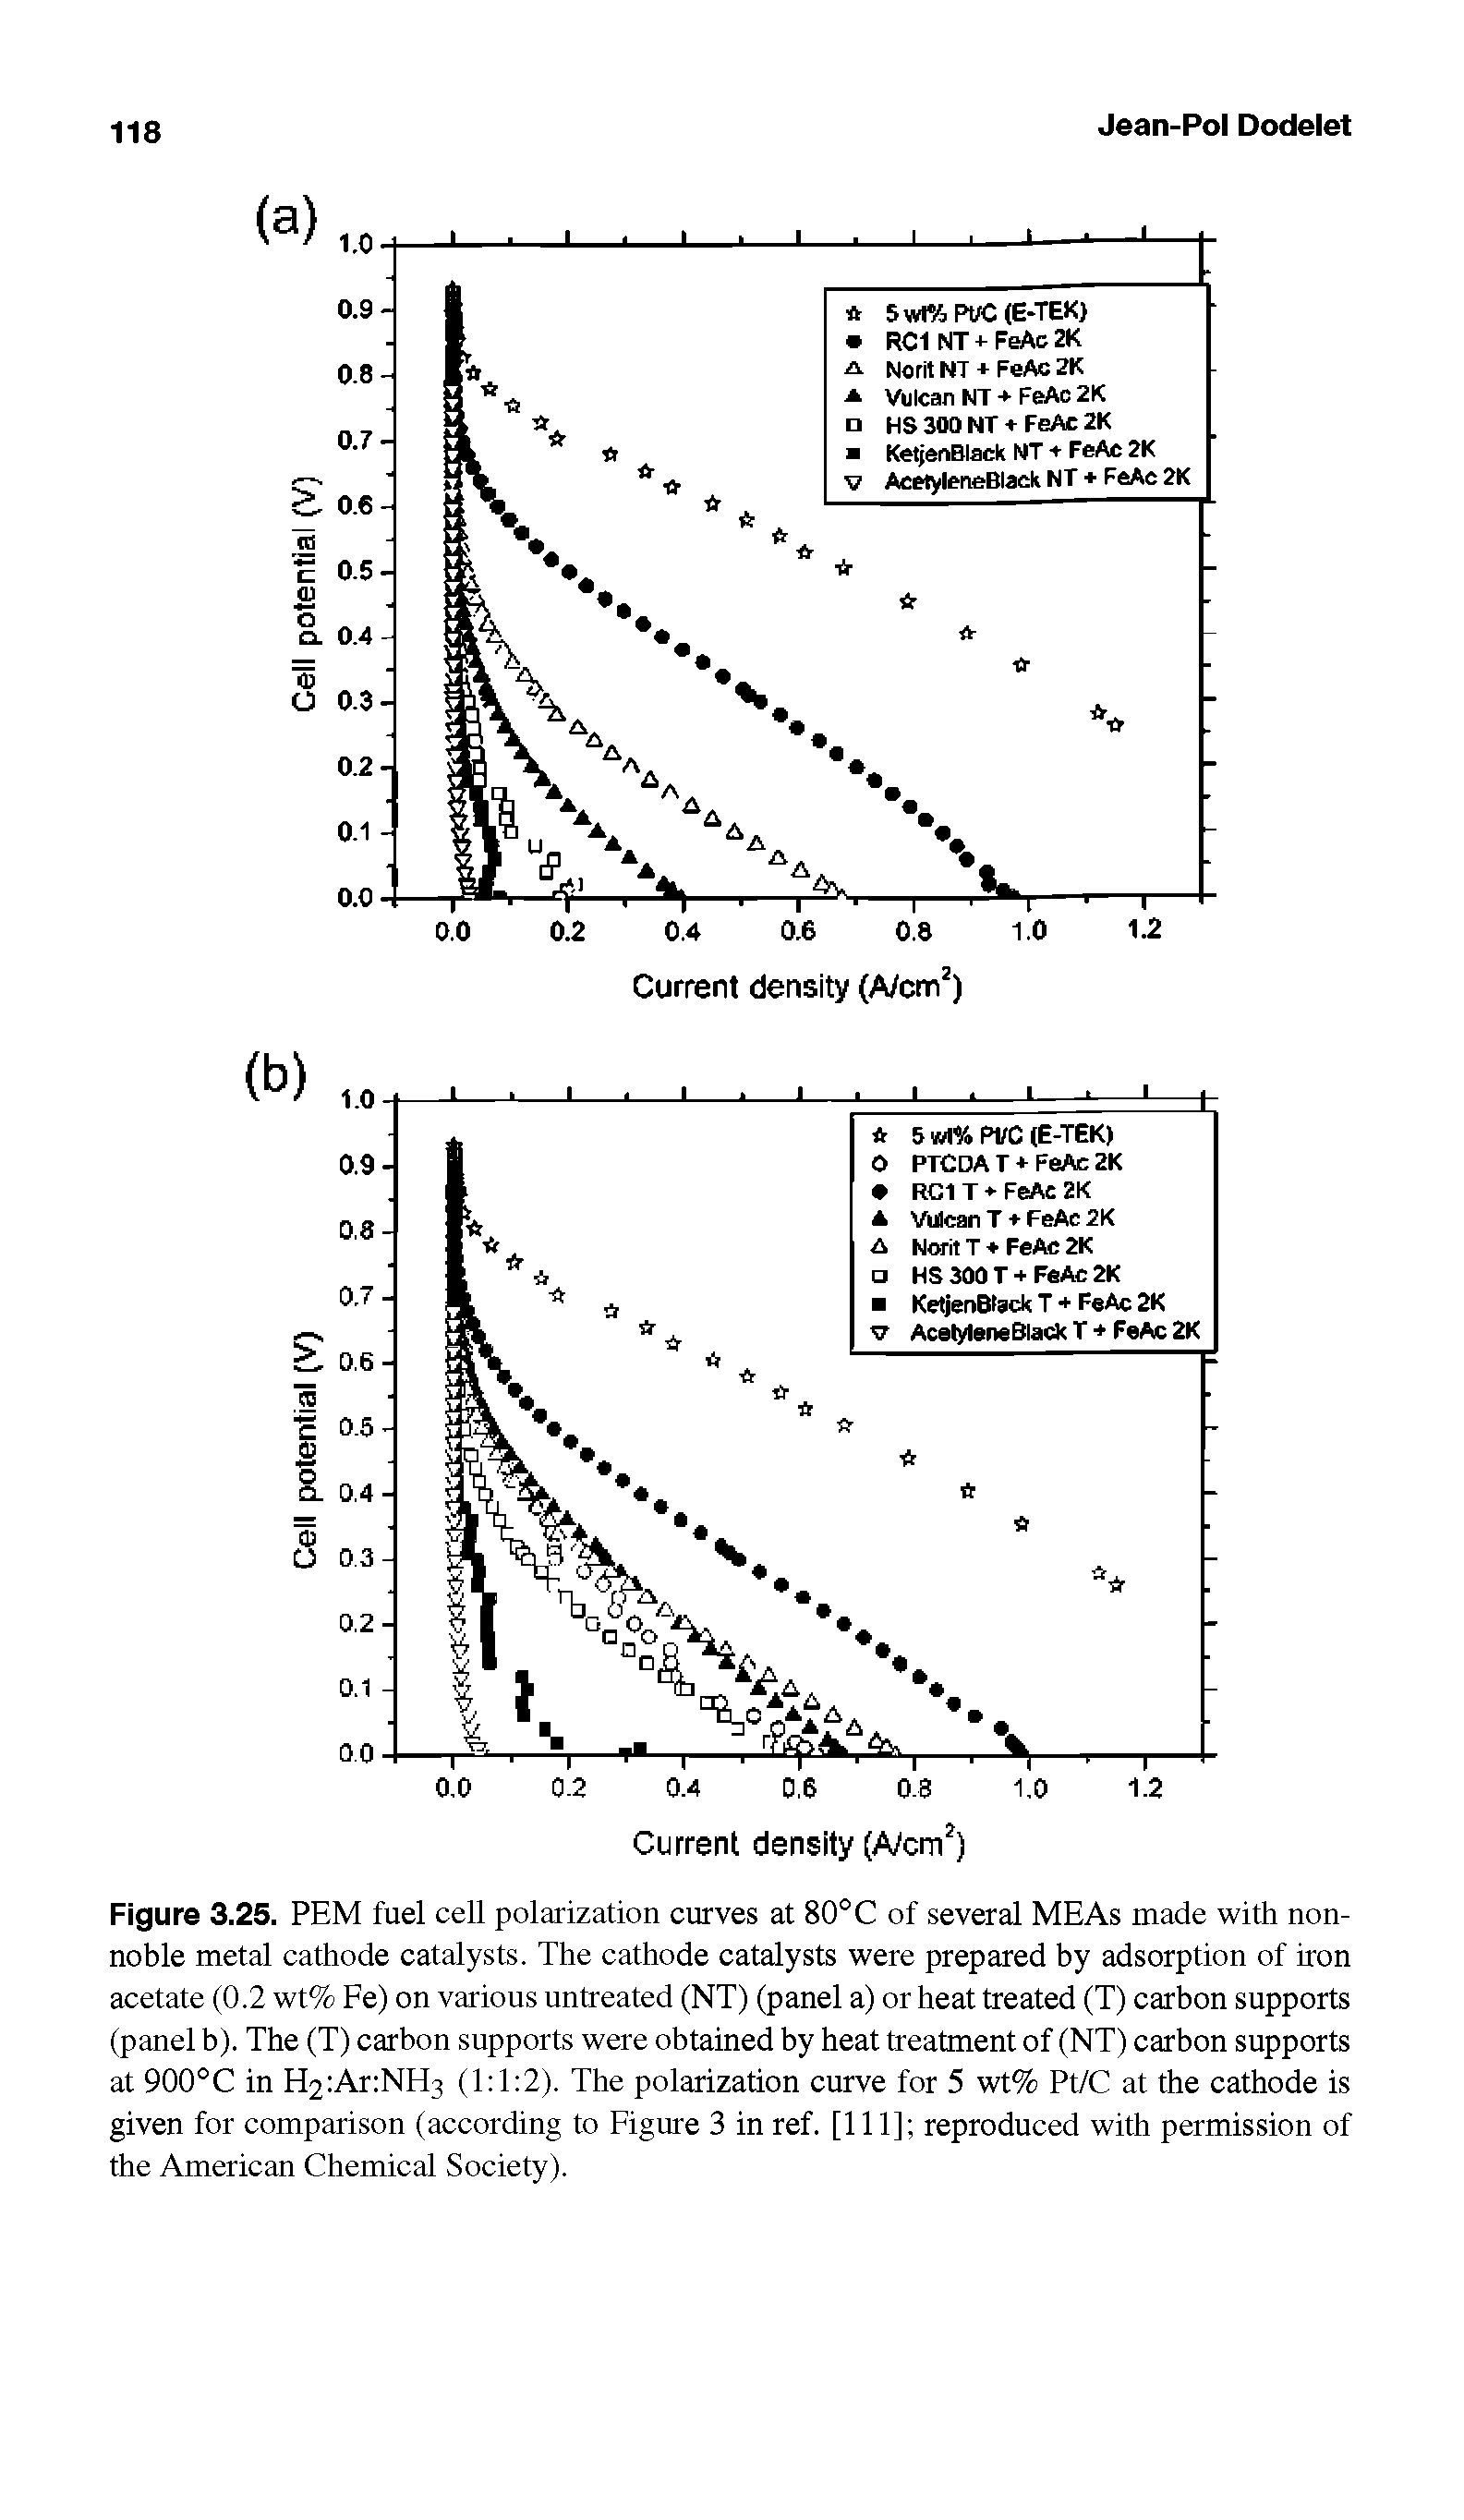 Figure 3.25. PEM fuel cell polarization curves at 80°C of several MEAs made with nonnoble metal cathode catalysts. The cathode catalysts were prepared by adsorption of iron acetate (0.2 wt% Fe) on various untreated (NT) (panel a) or heat treated (T) carbon supports (panel b). The (T) carbon supports were obtained by heat beatment of (NT) carbon supports at 900°C in H2 Ar NH3 (1 1 2). The polarization curve for 5 wt% Pt/C at the cathode is given for comparison (according to Figure 3 in ref. [Ill] reproduced with permission of the American Chemical Society).